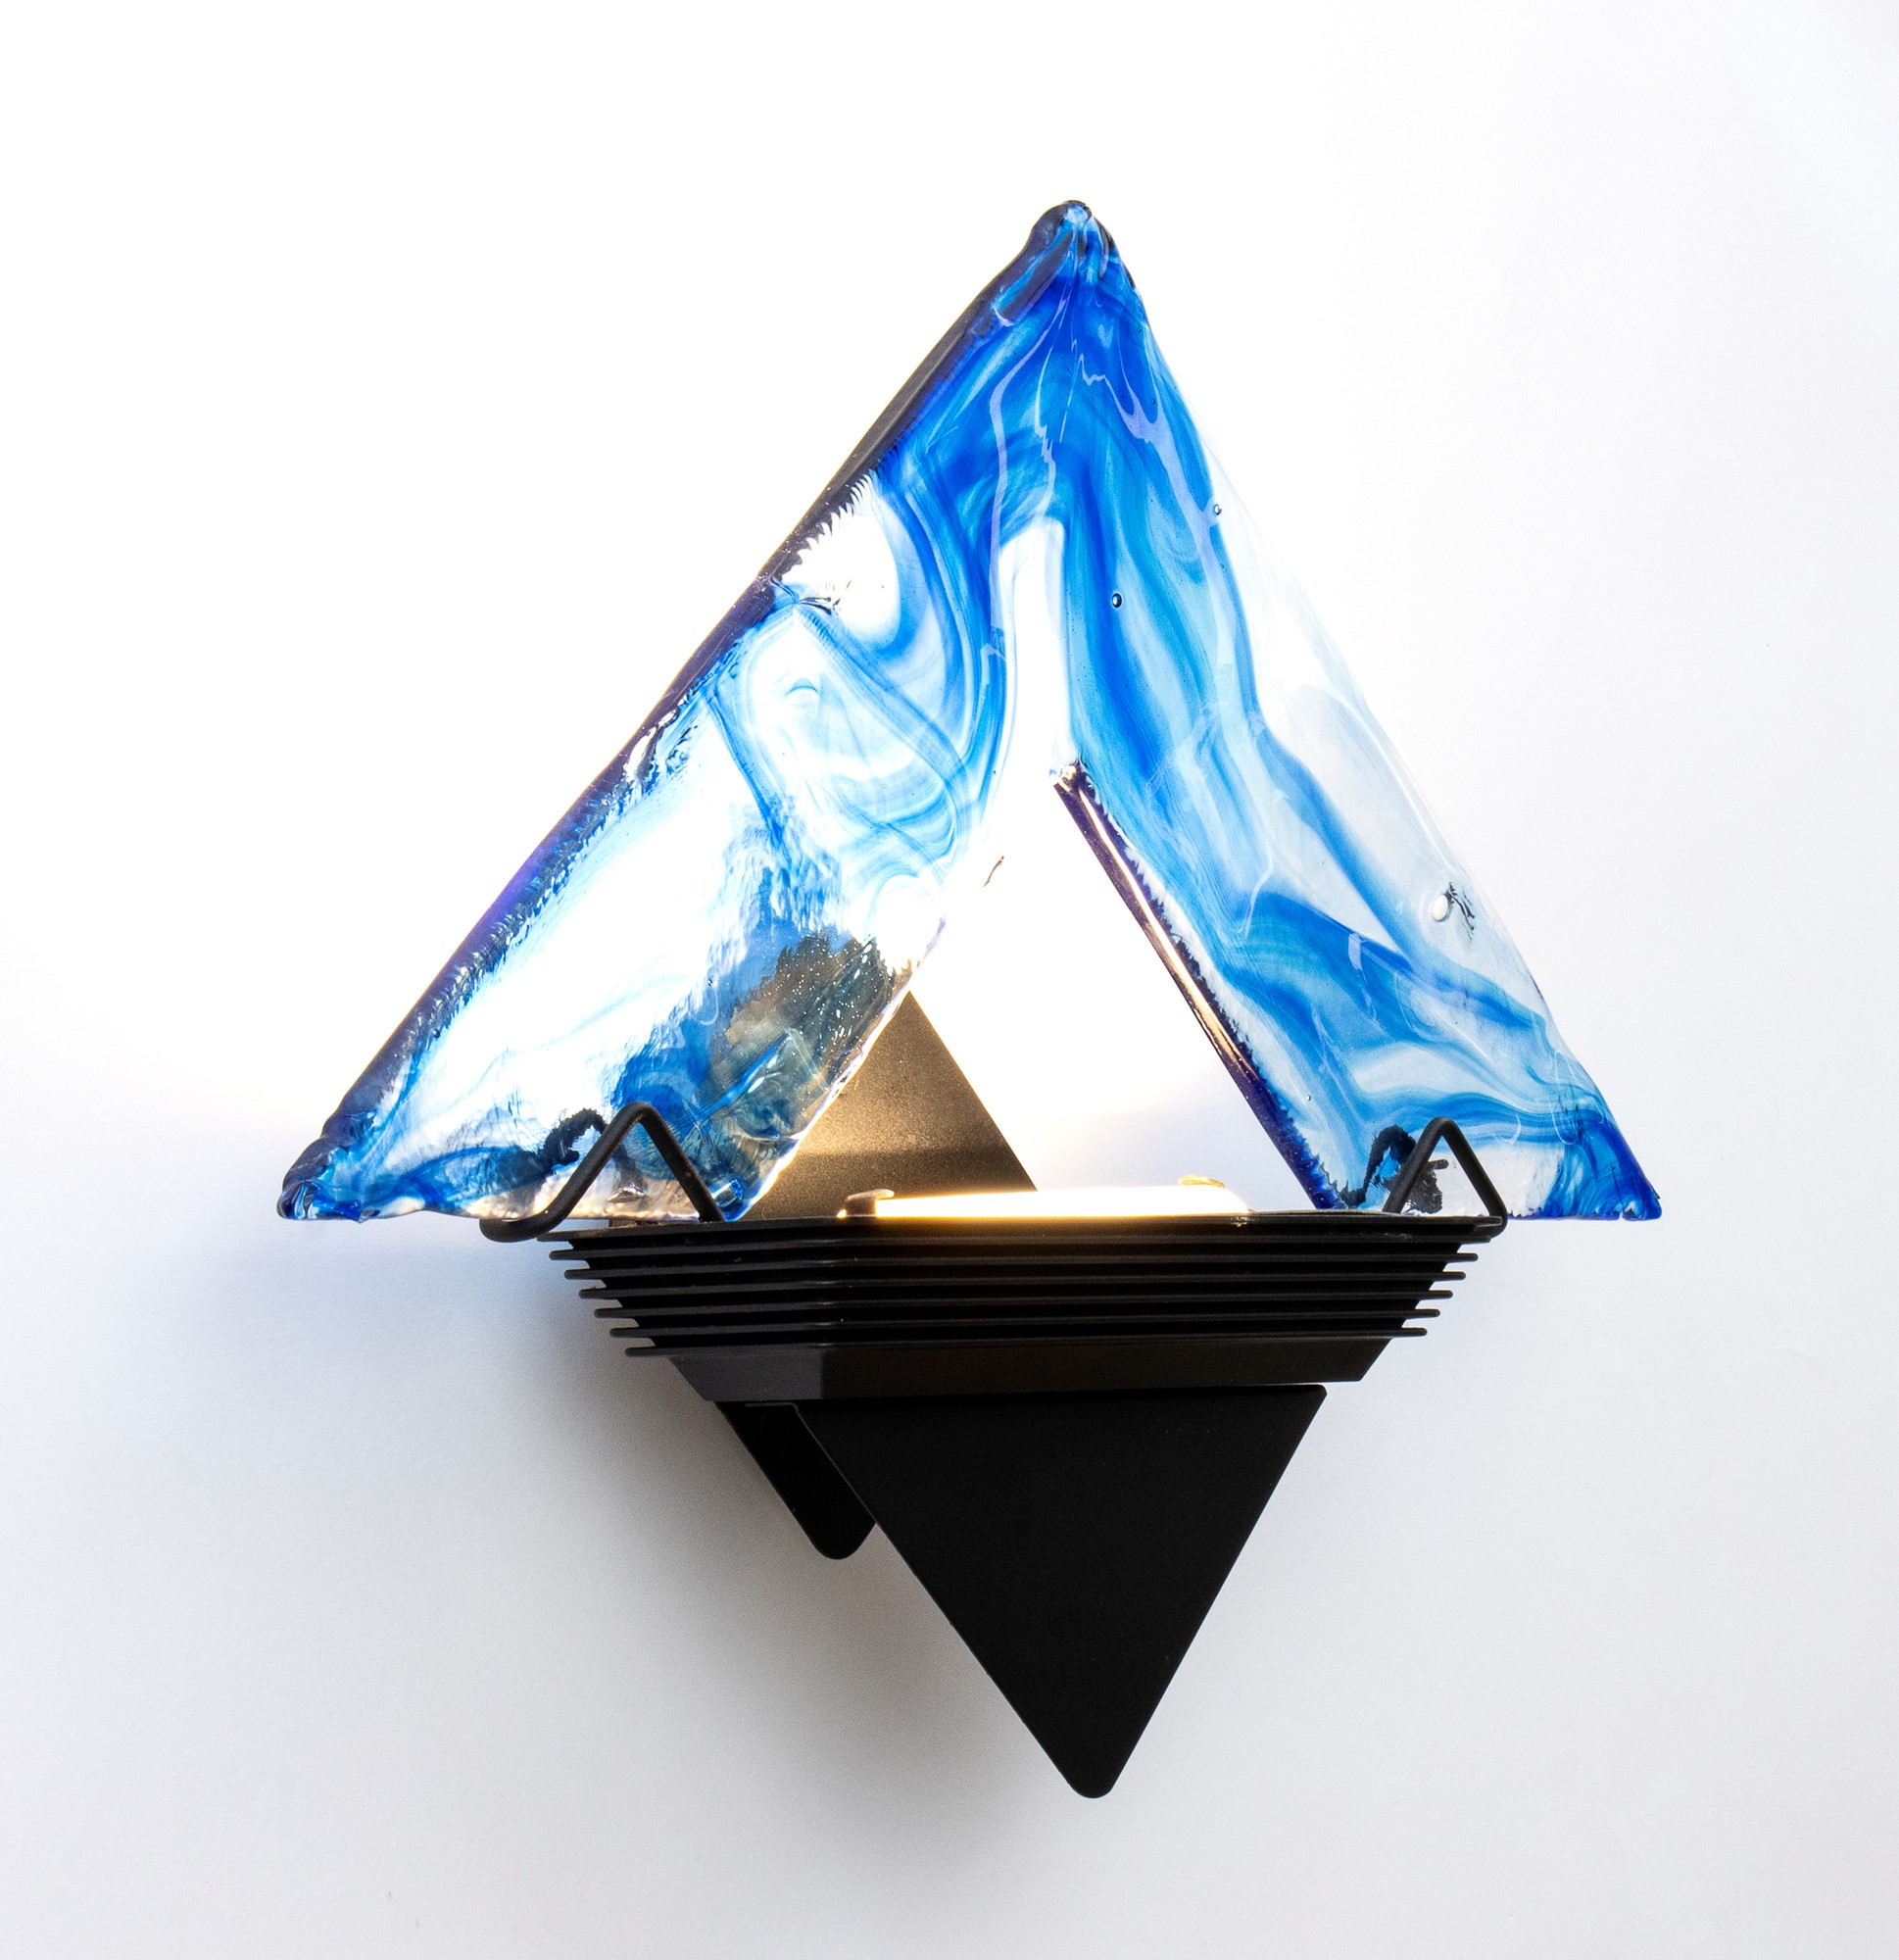 La Murrina wing lamp in hand blown Murano glass mounted on a triangular frame - Image 10 of 27